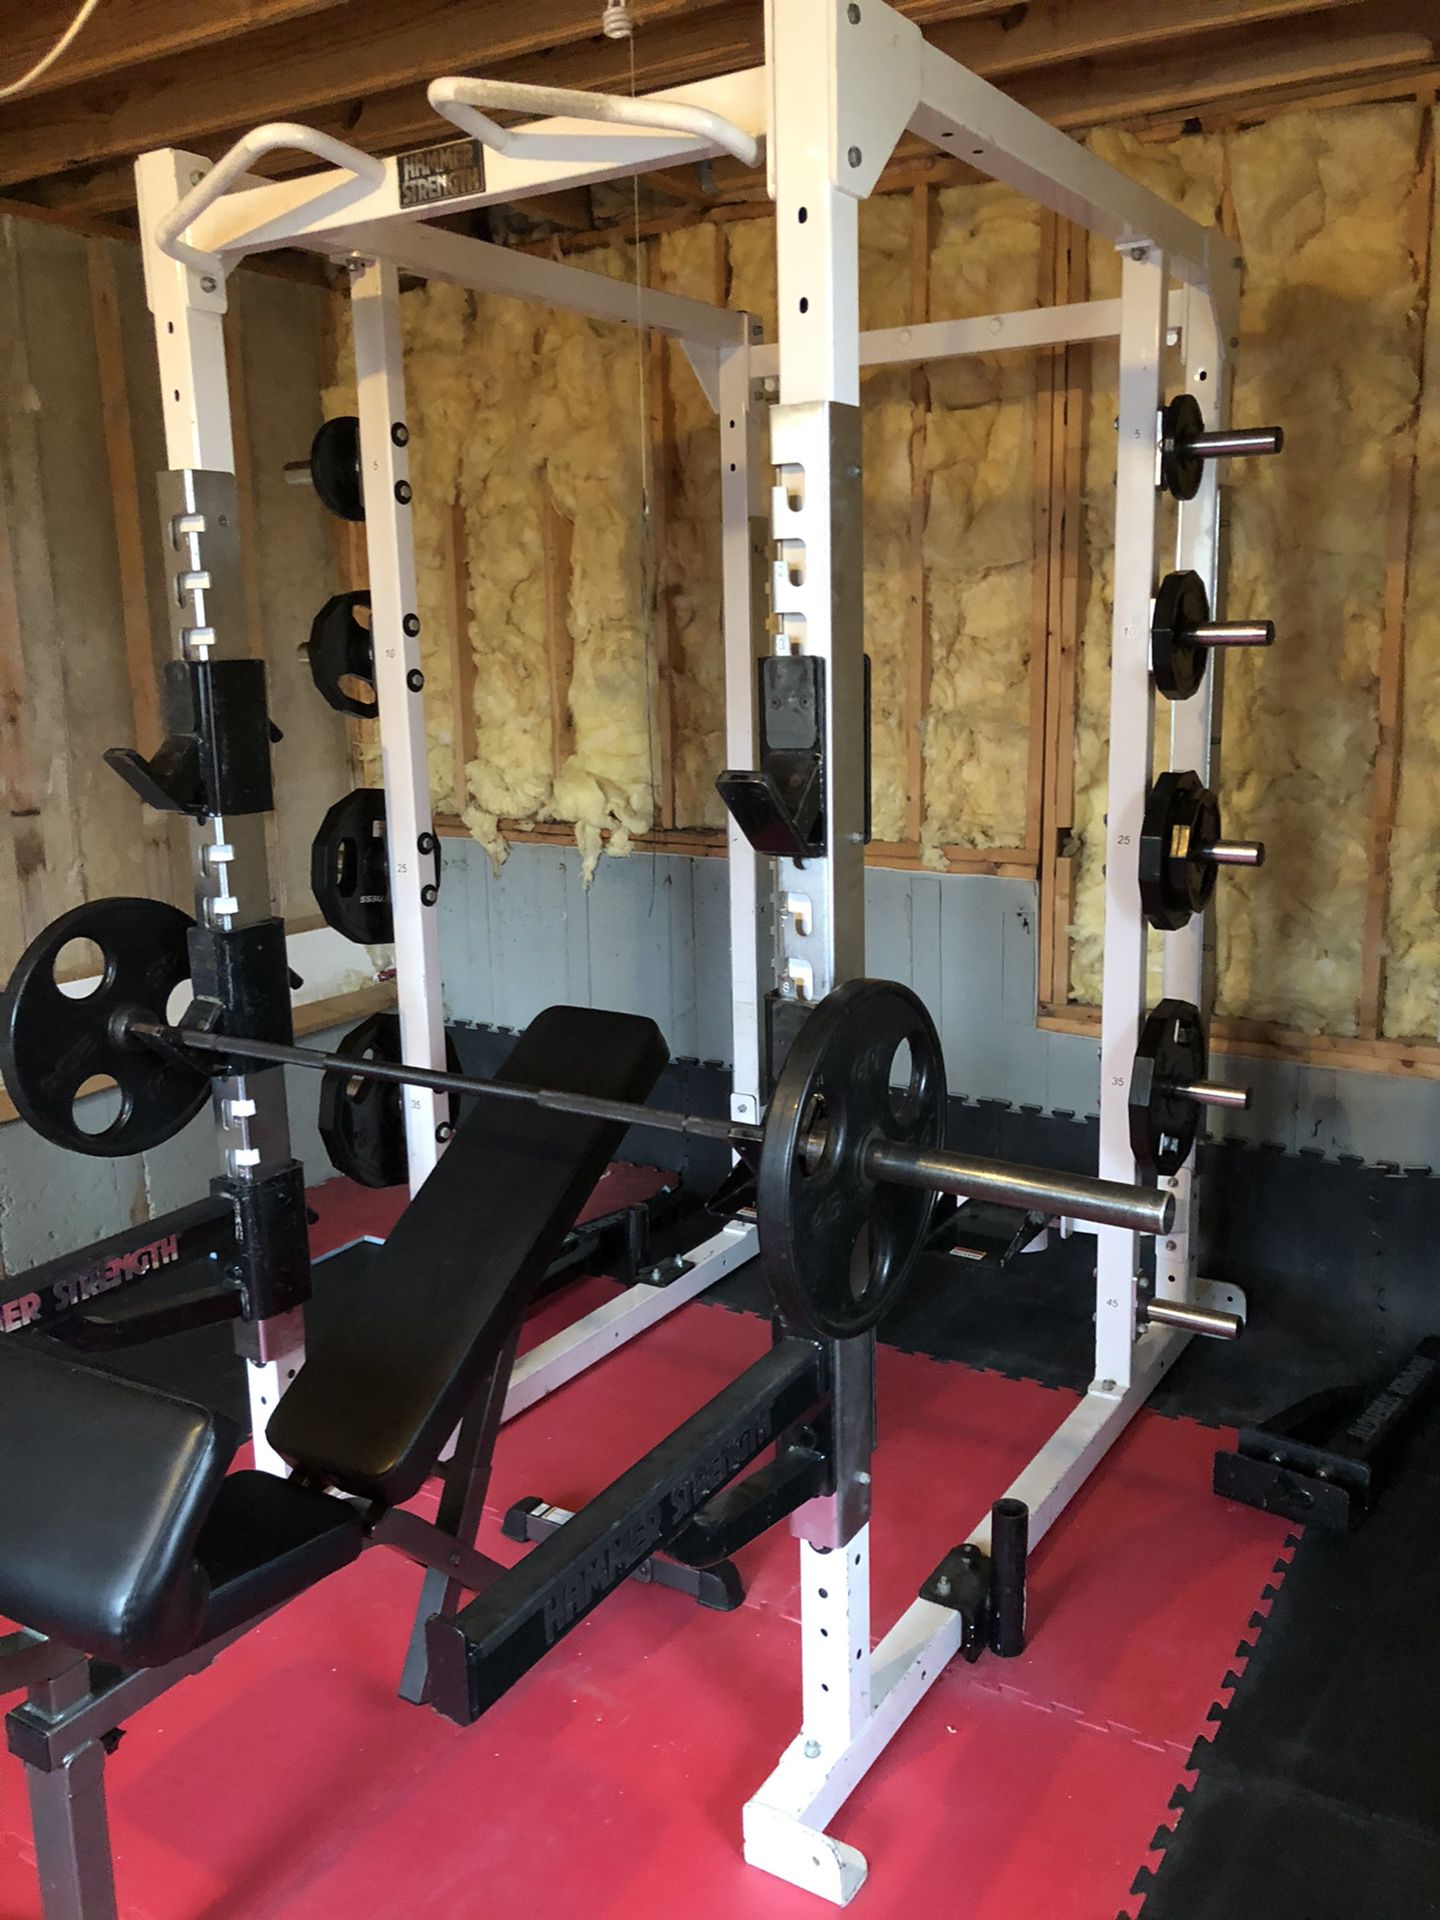 Double sided Hammer Strength Power Rack with Parabody Olympic bench, PowerMax Olympic barbel and full set of Iron Grip Olympic weights